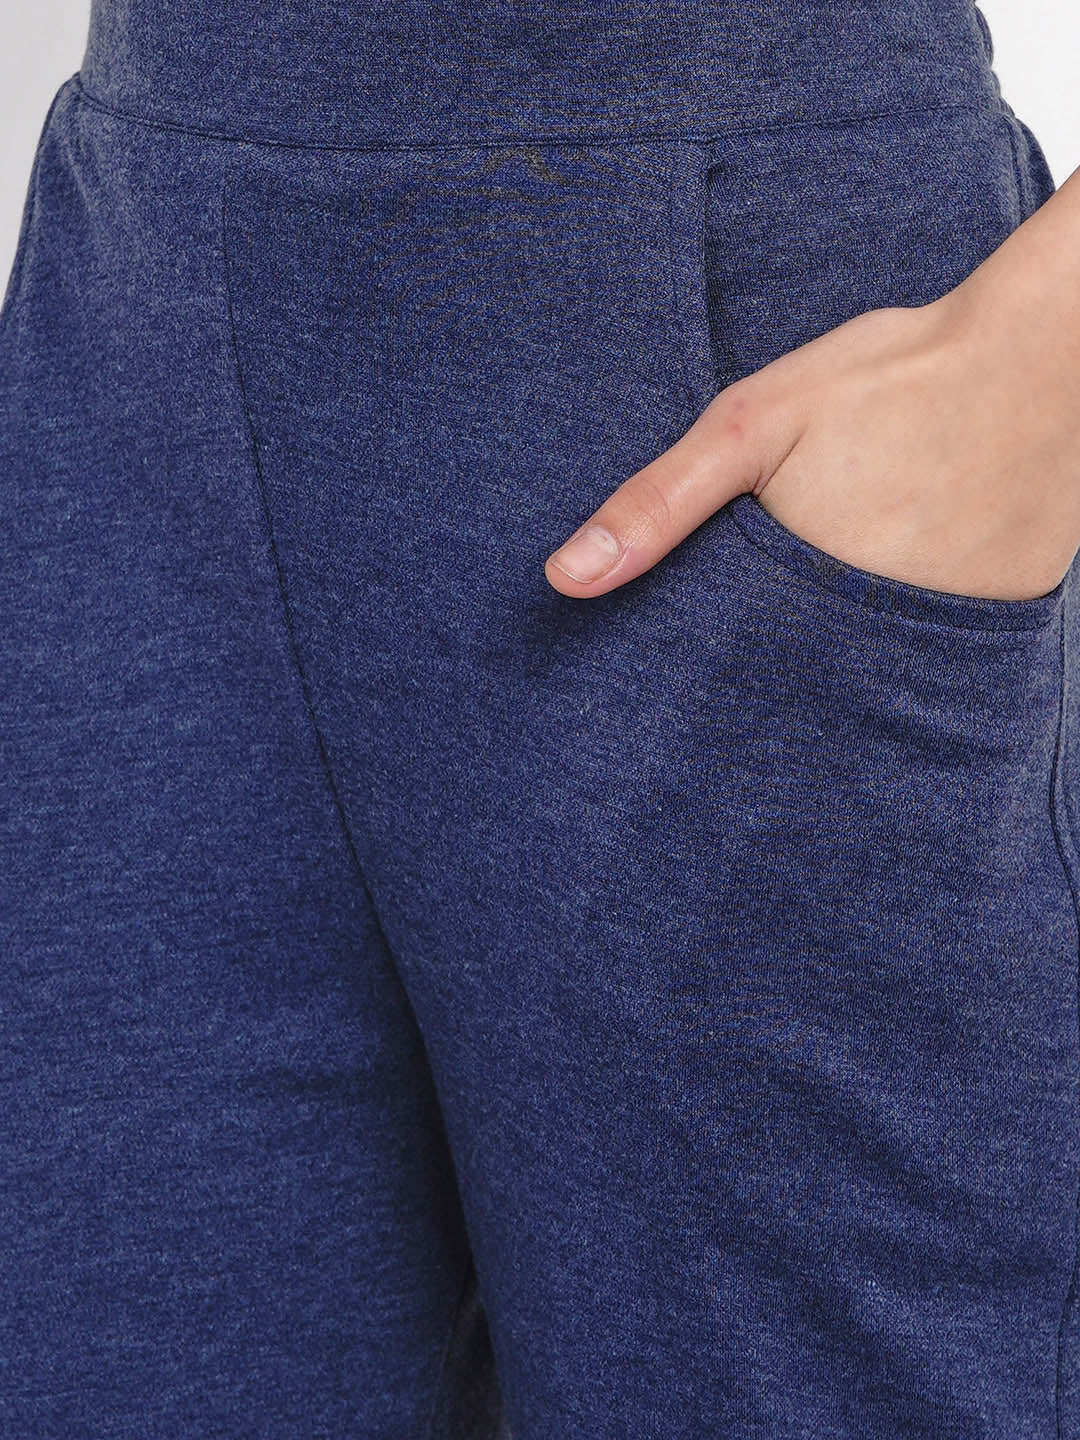 Navy Blue Cotton Solid Track Pants